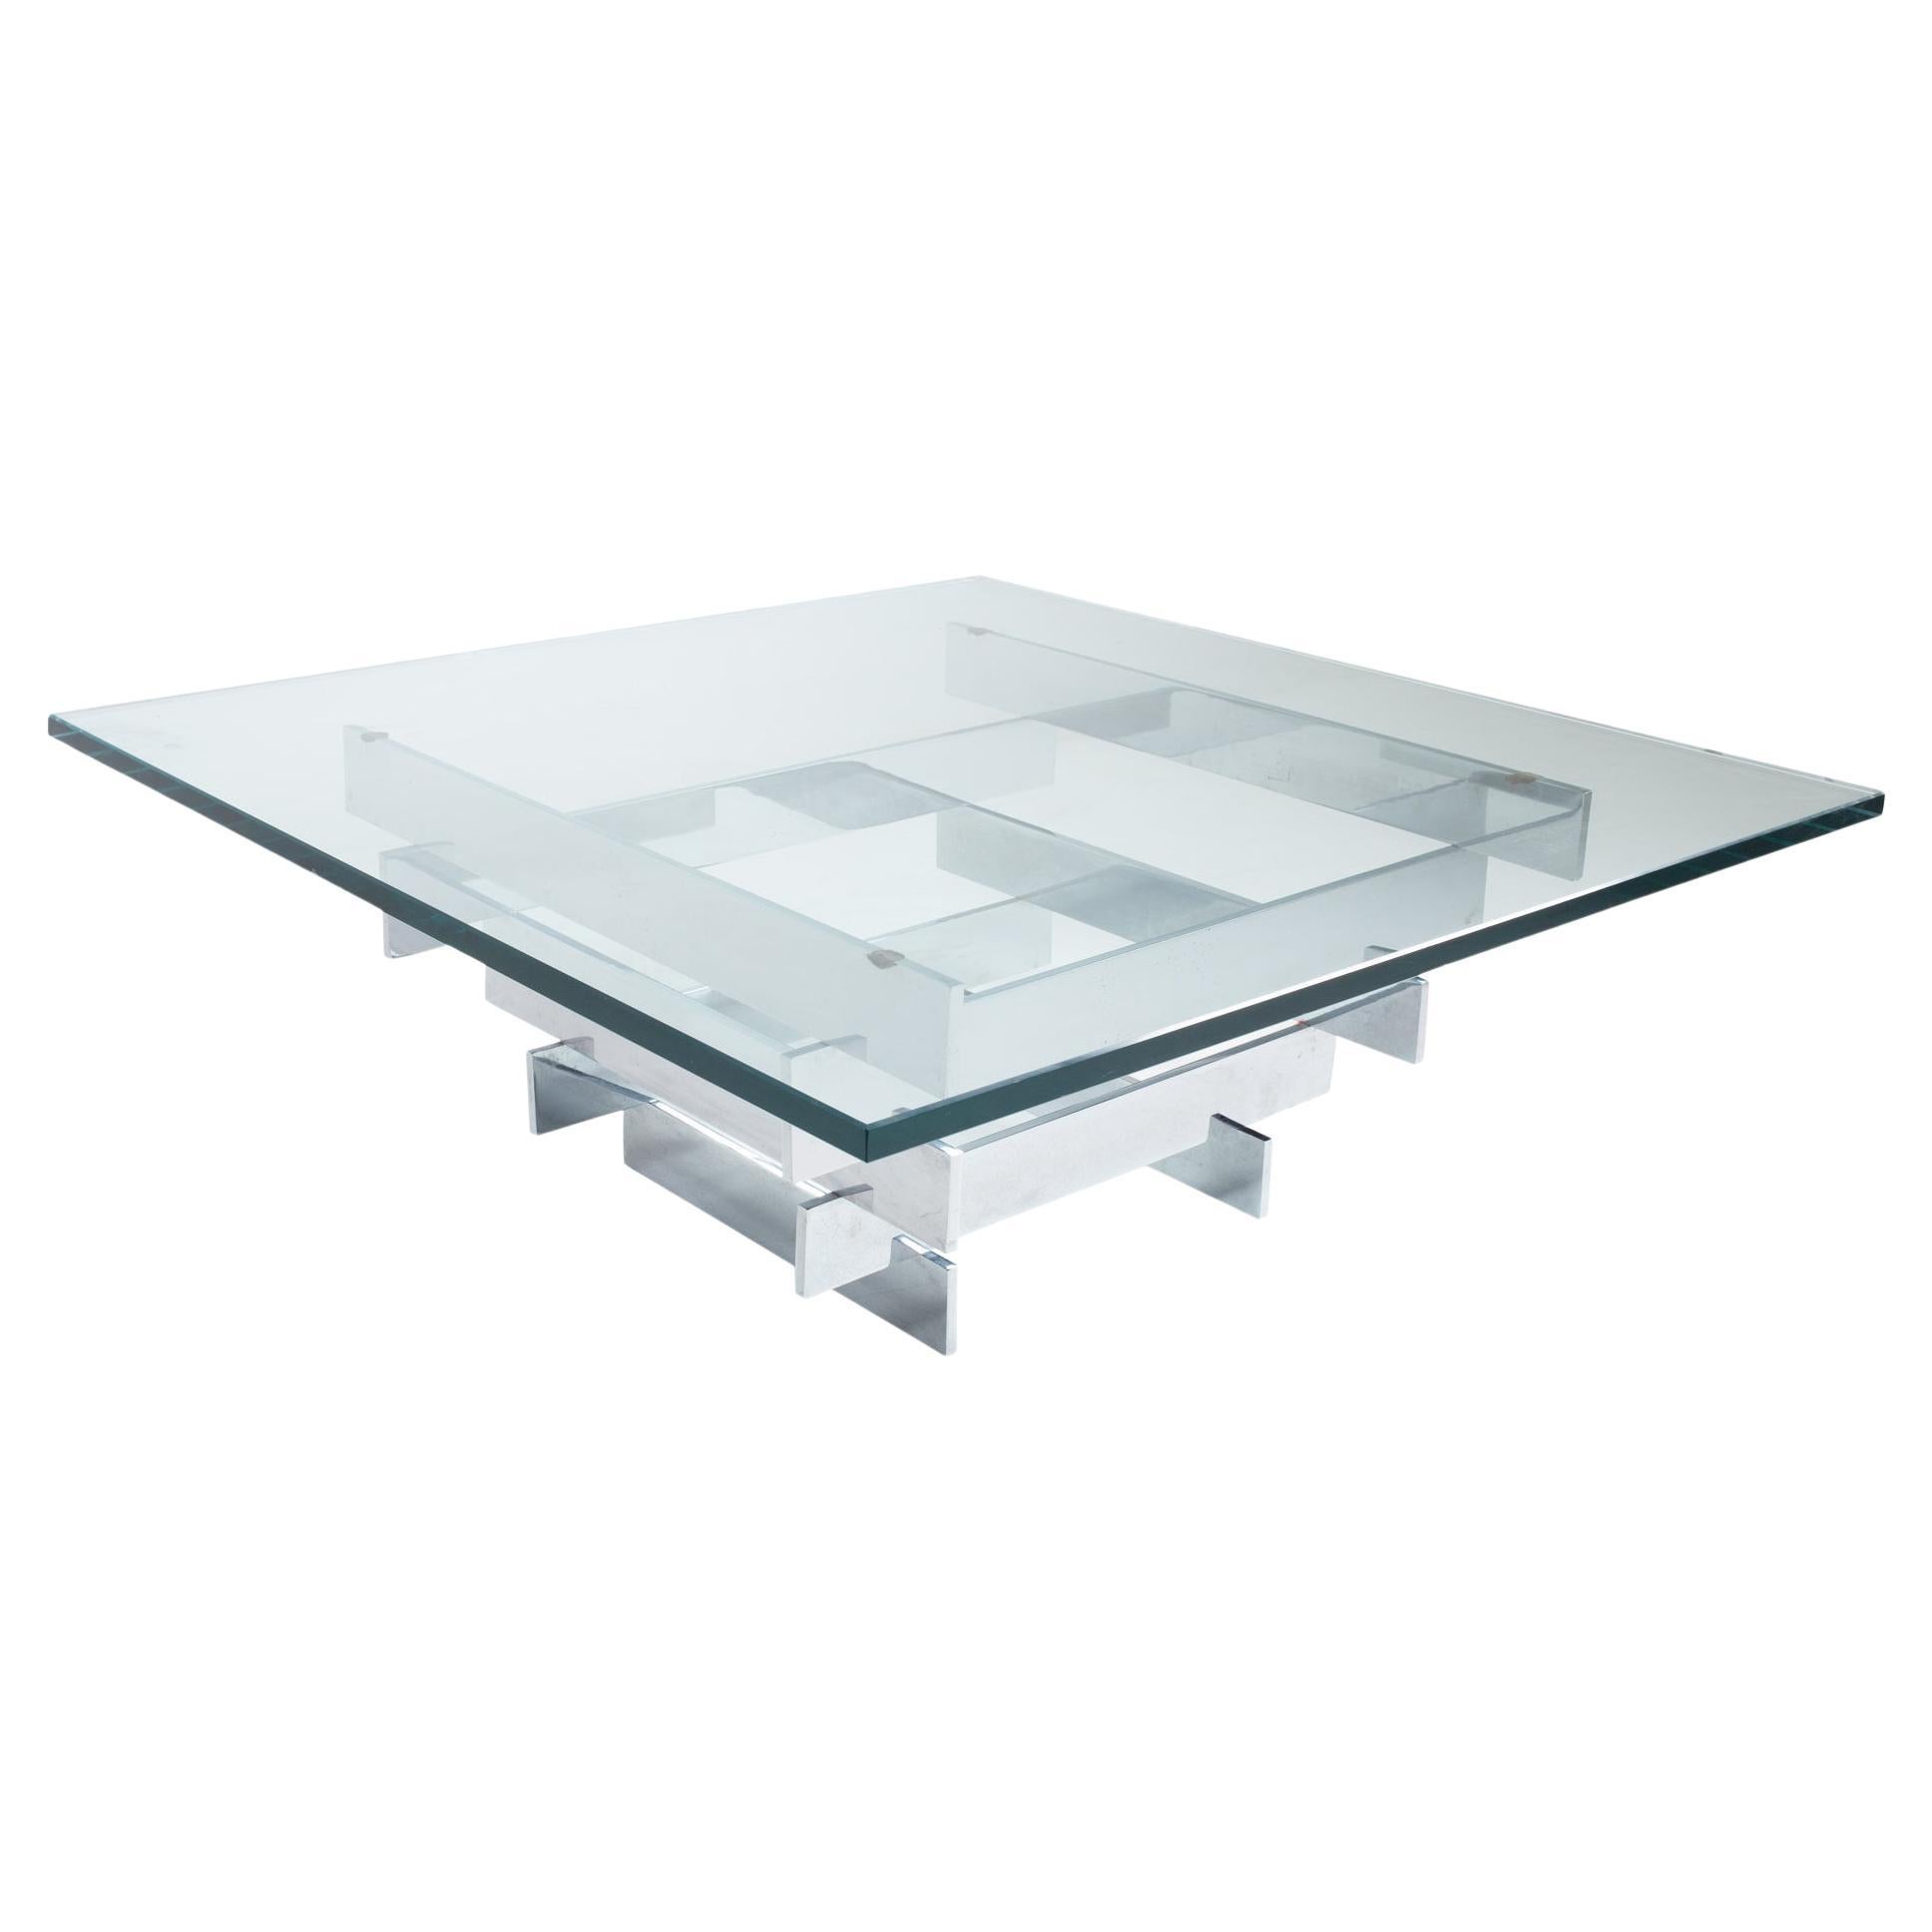 Paul Mayen for Habitat Midcentury Chrome and Glass Coffee Table For Sale